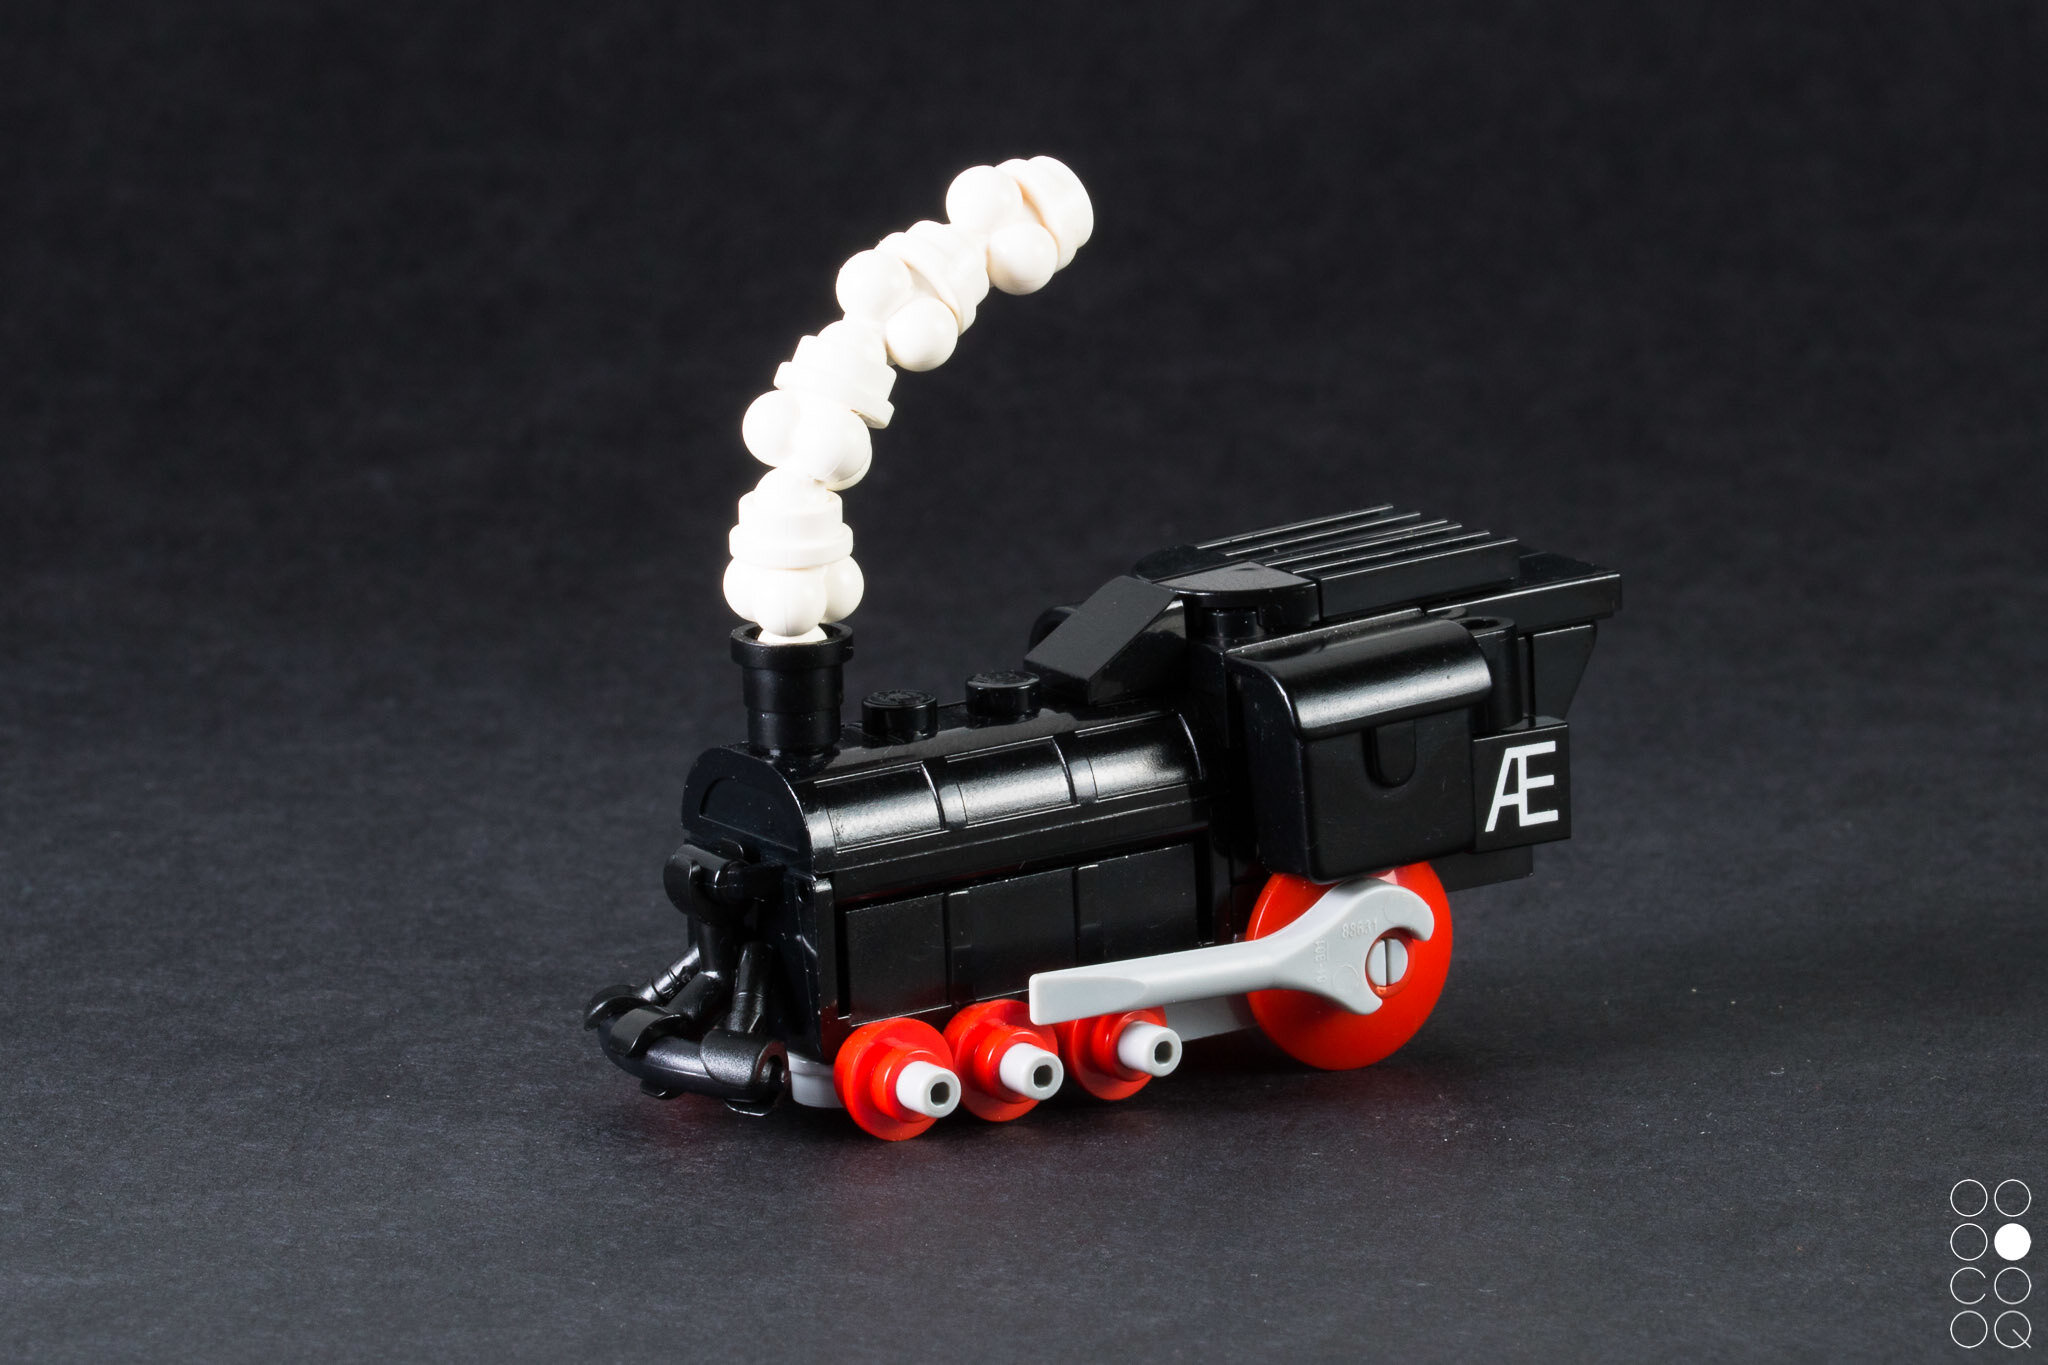 Swedish Steam: A Tremendous Train Two Years in the Making - BrickNerd - All  things LEGO and the LEGO fan community